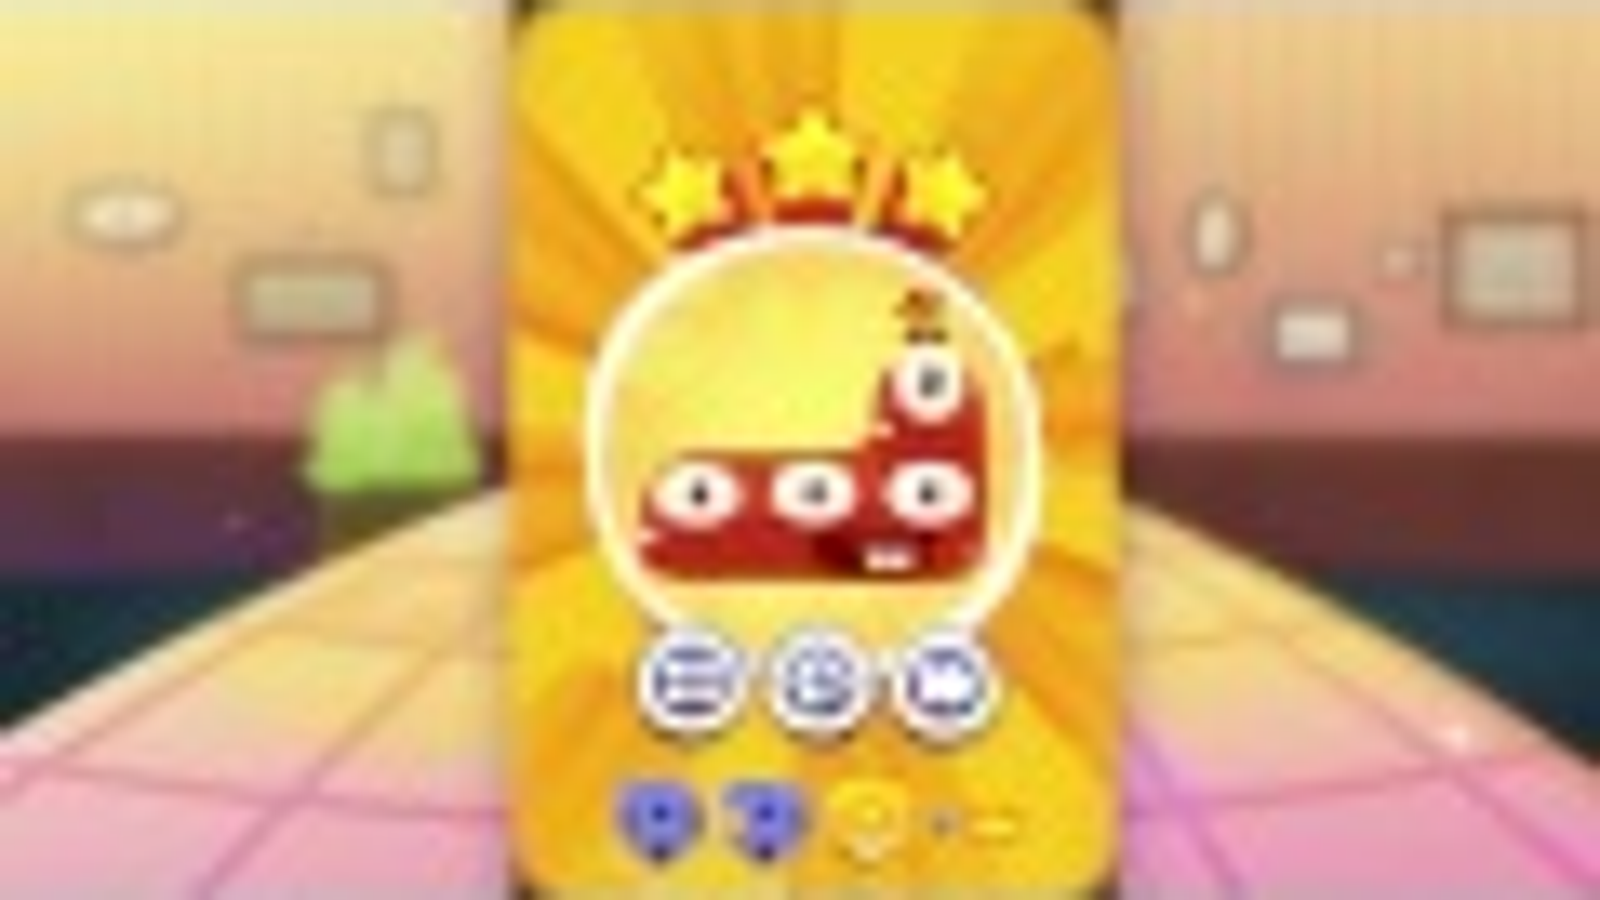 free download cut the rope 2 boo